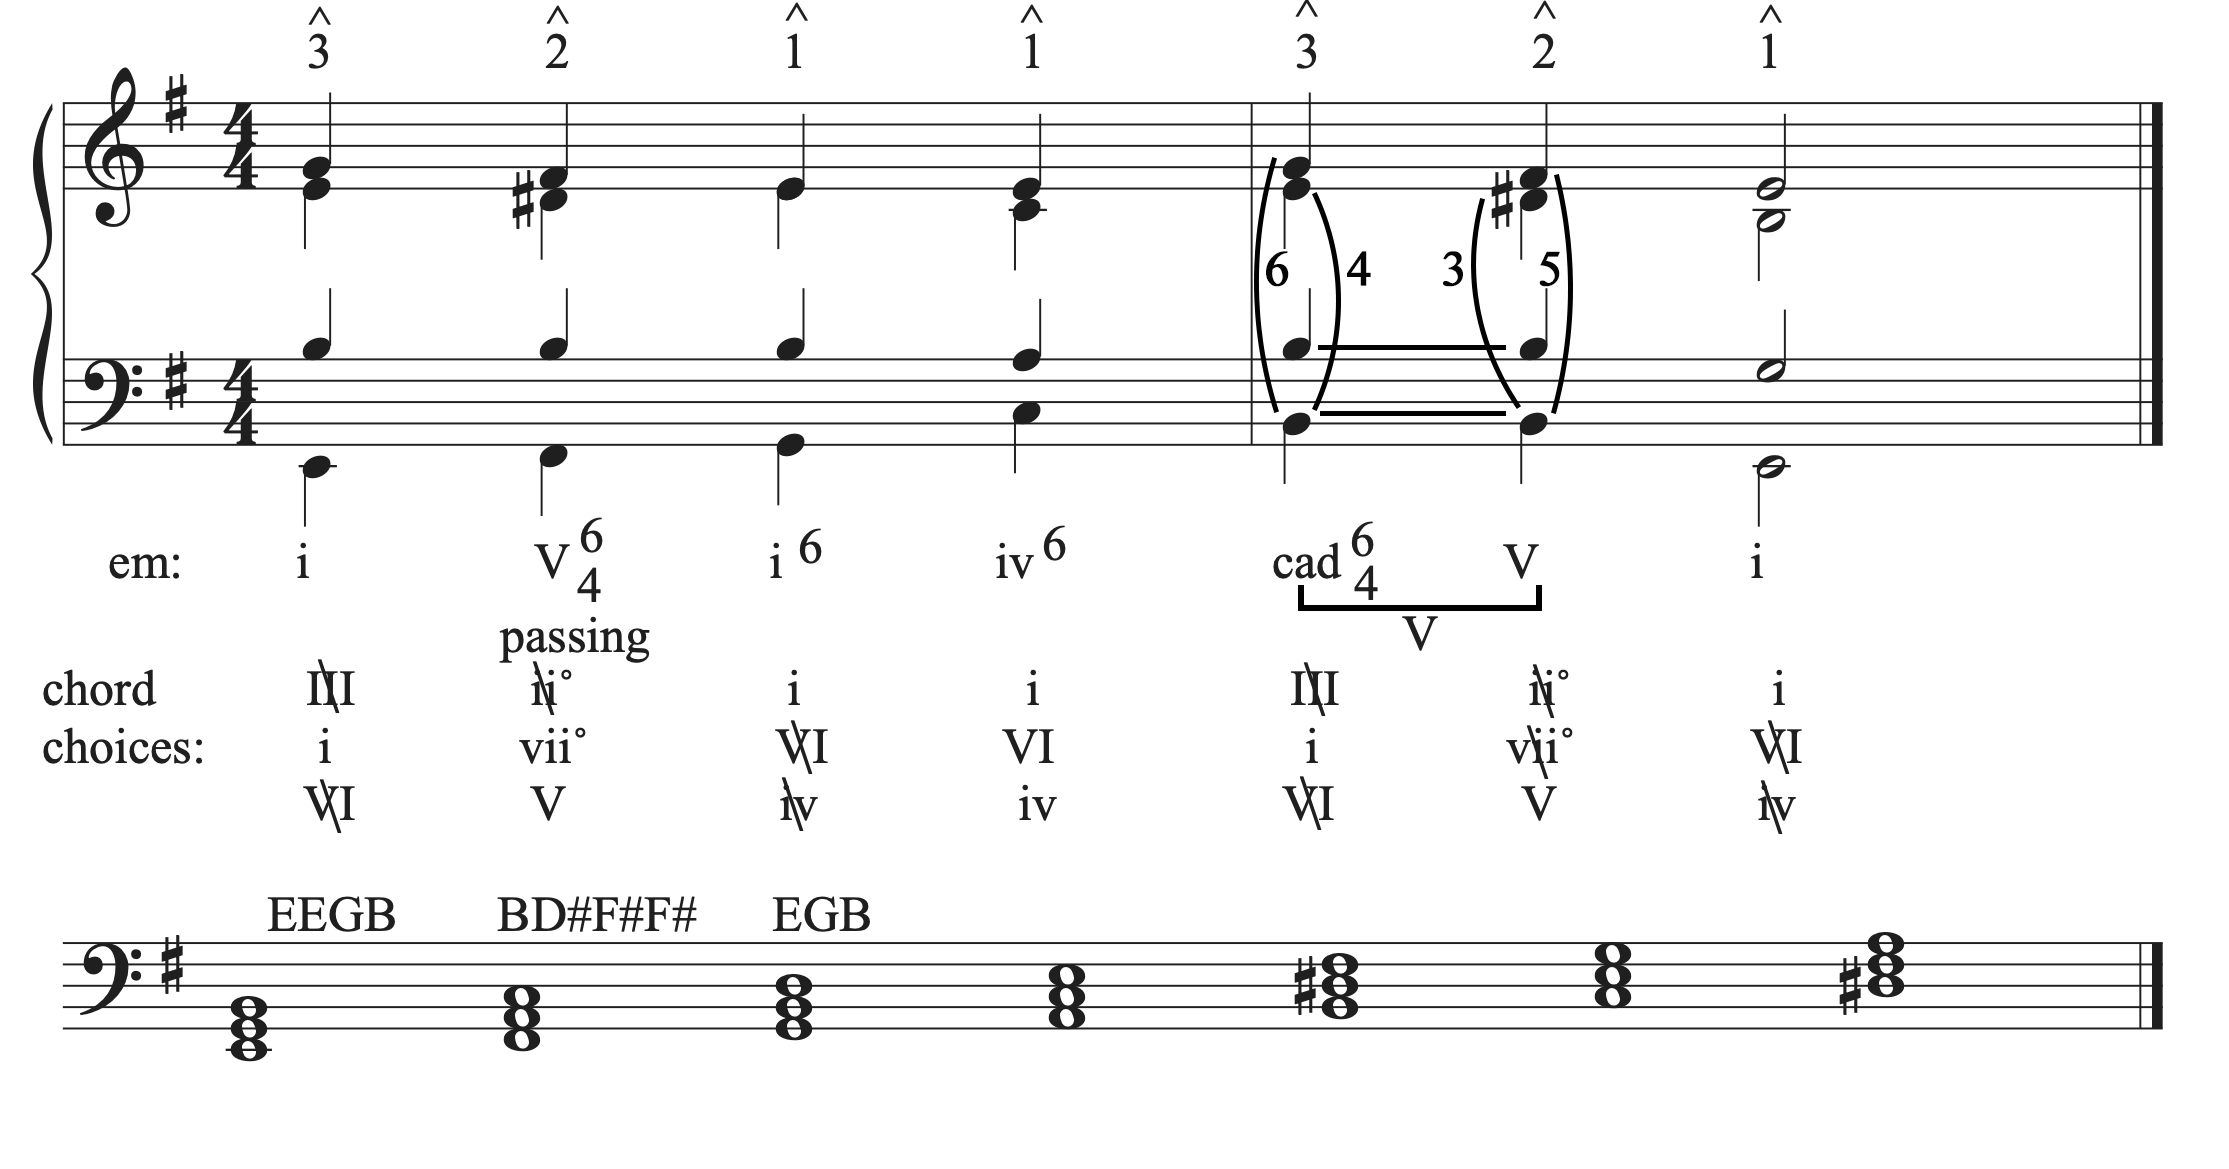 The musical example in G major with the cadential six-four chord added.